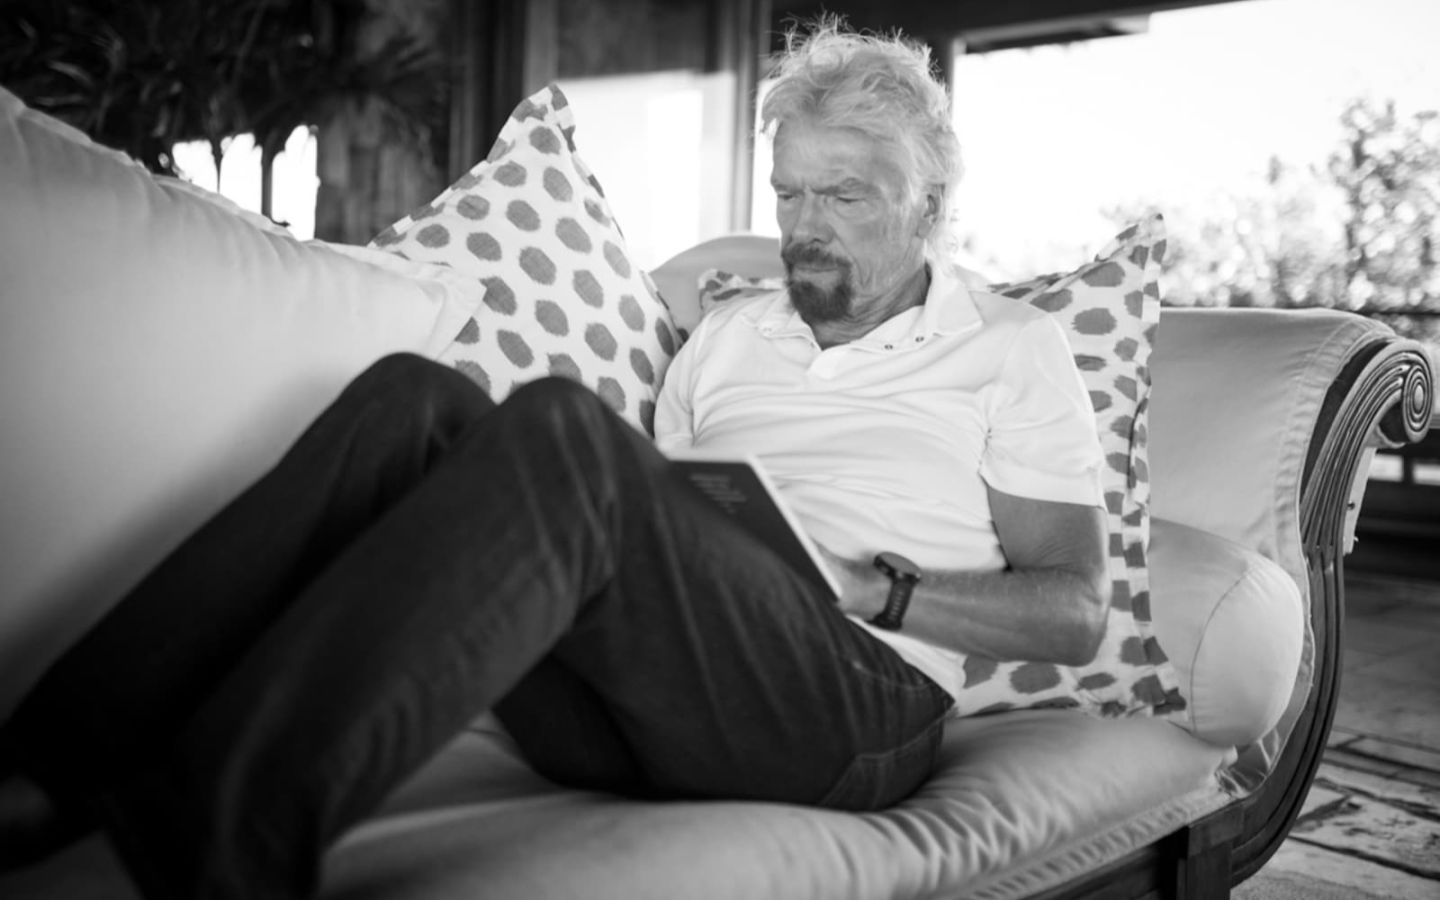 A black and white image of Richard Branson with his feet up on the sofa reading a book